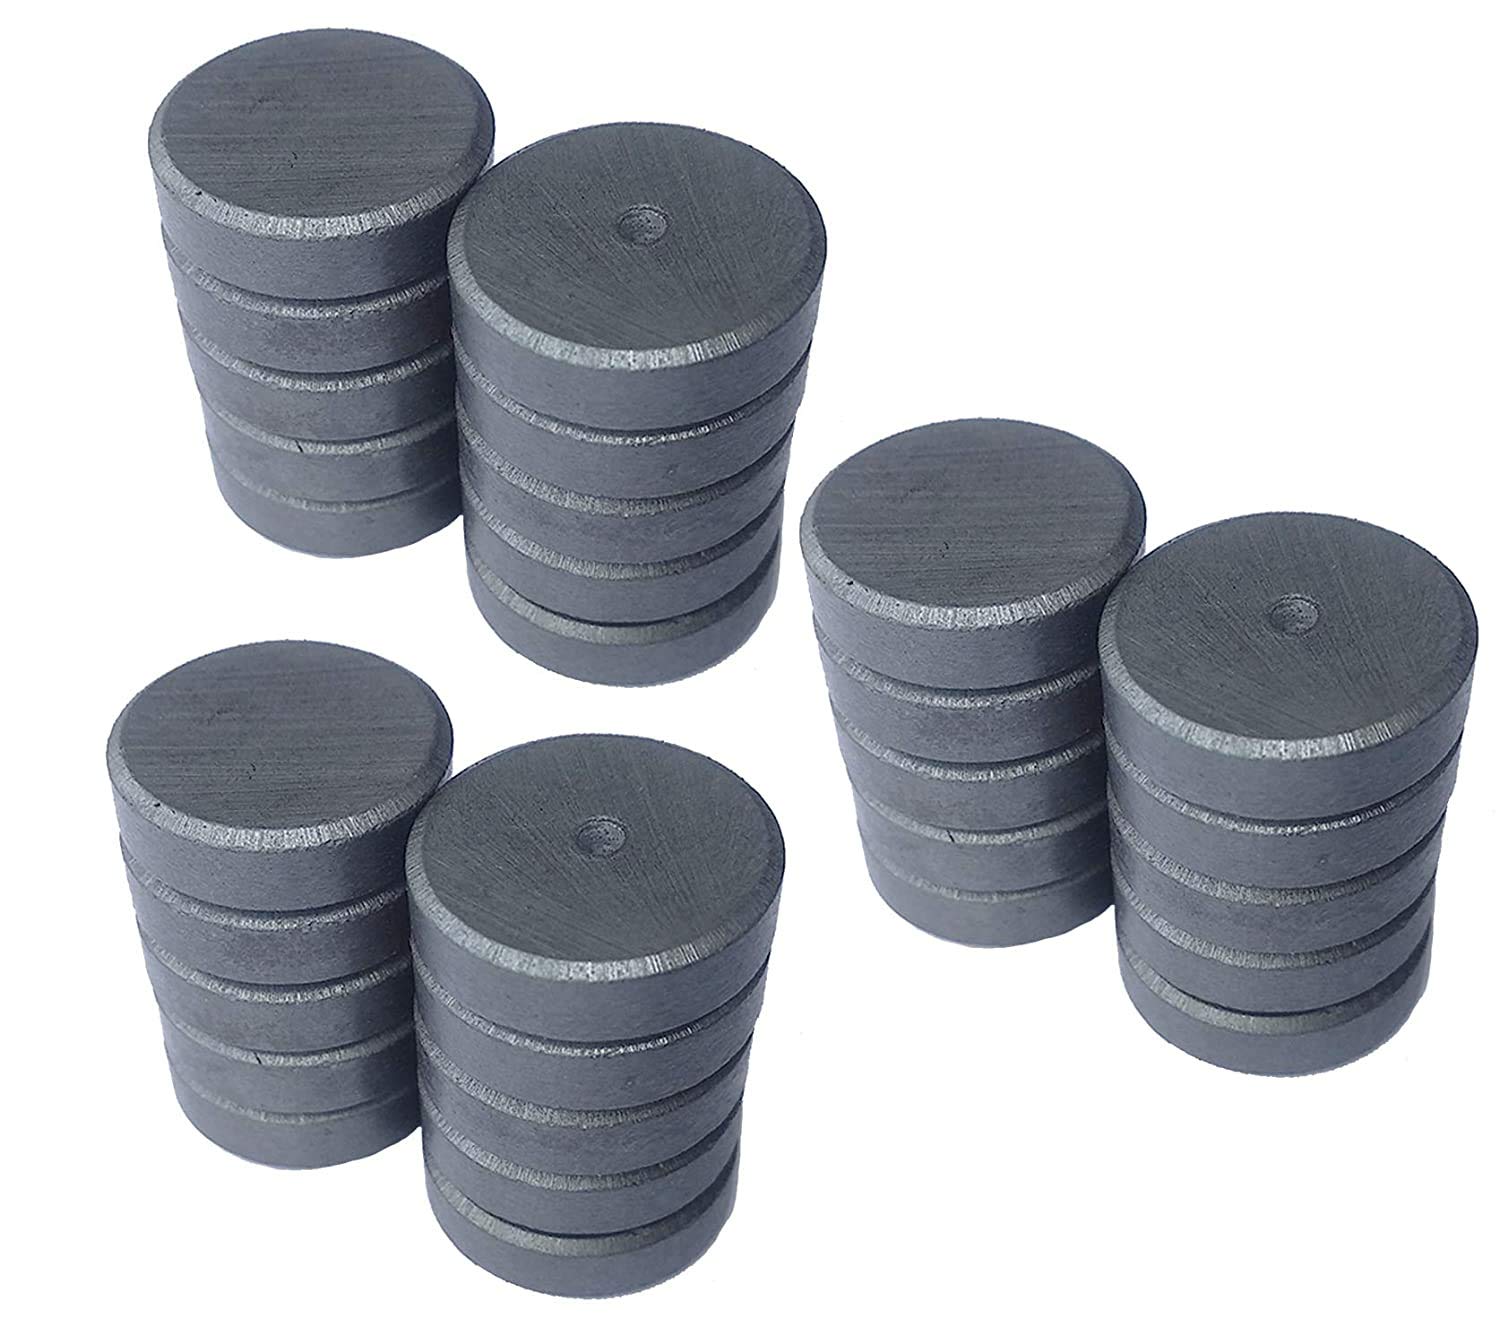 Ceramic/Ferrite Strong Magnets| Size: (18x5) mm, Industrial Powerful [Grade 11] LifeKrafts